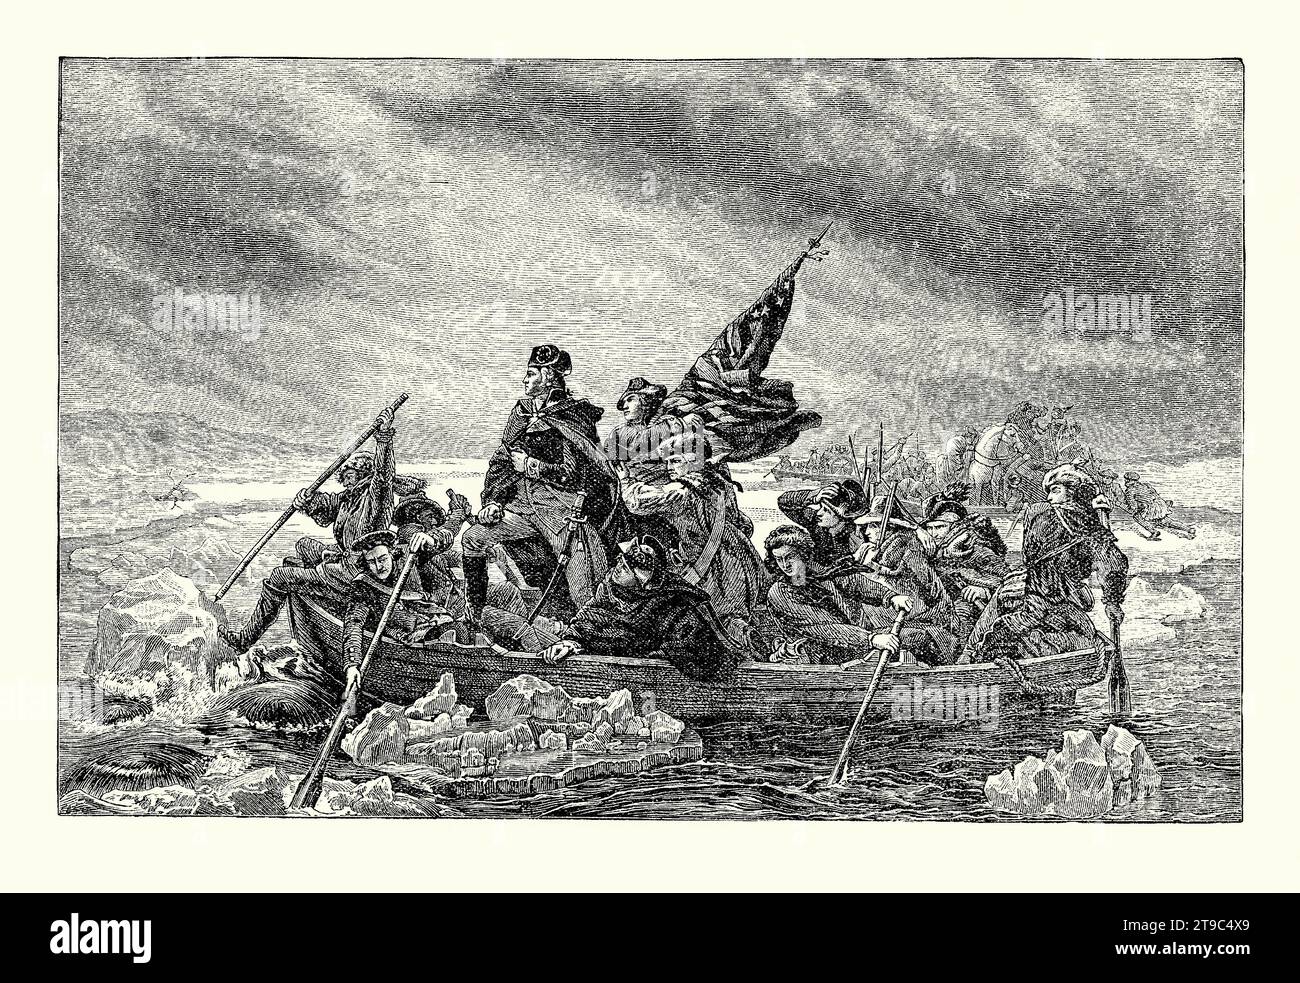 An old engraving of General George Washington’s secretive crossing in small boats of the icy Delaware River, Mercer County, Pennsylvania, USA on the night of December 25 1776. It is from an American history book of 1895. It took place during the American Revolutionary War, and was a surprise attack organised by Washington, the commander-in-chief of the Continental Army, against the garrison at Trenton, New Jersey who were German mercenaries (Hessians) hired by the British. After the crossing, Washington’s troops successfully attacked the Hessians in the Battle of Trenton on December 26 1776. Stock Photo